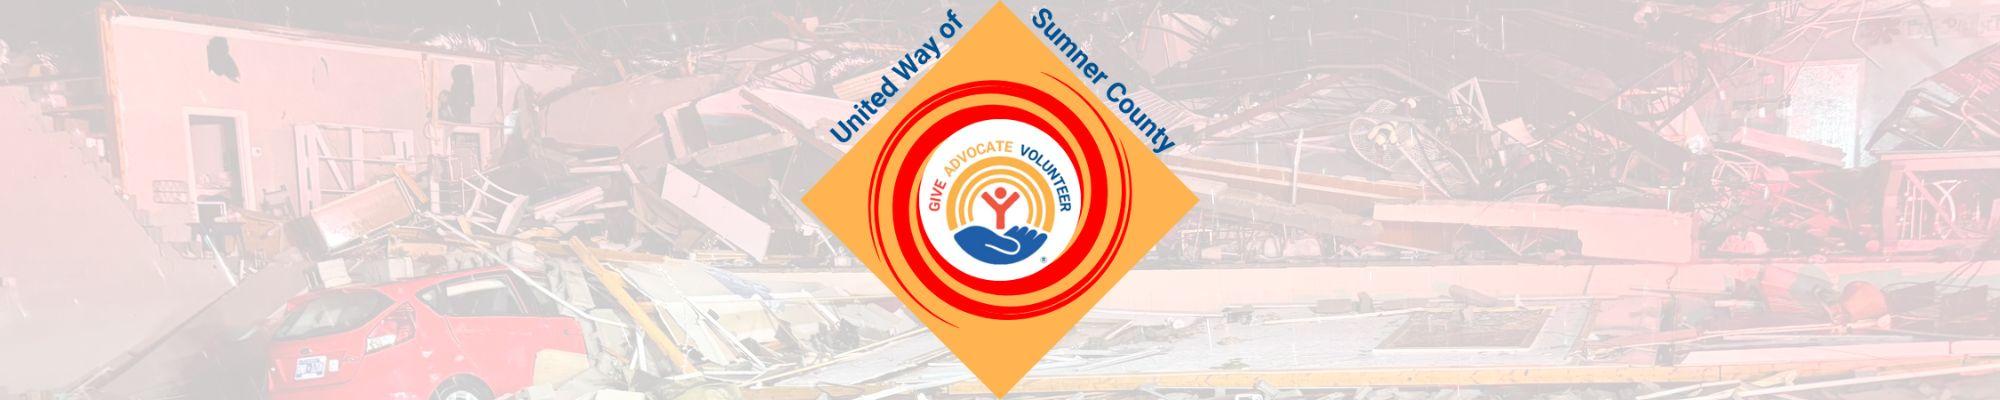 UWSC Disaster relief logo with phot and white overlay